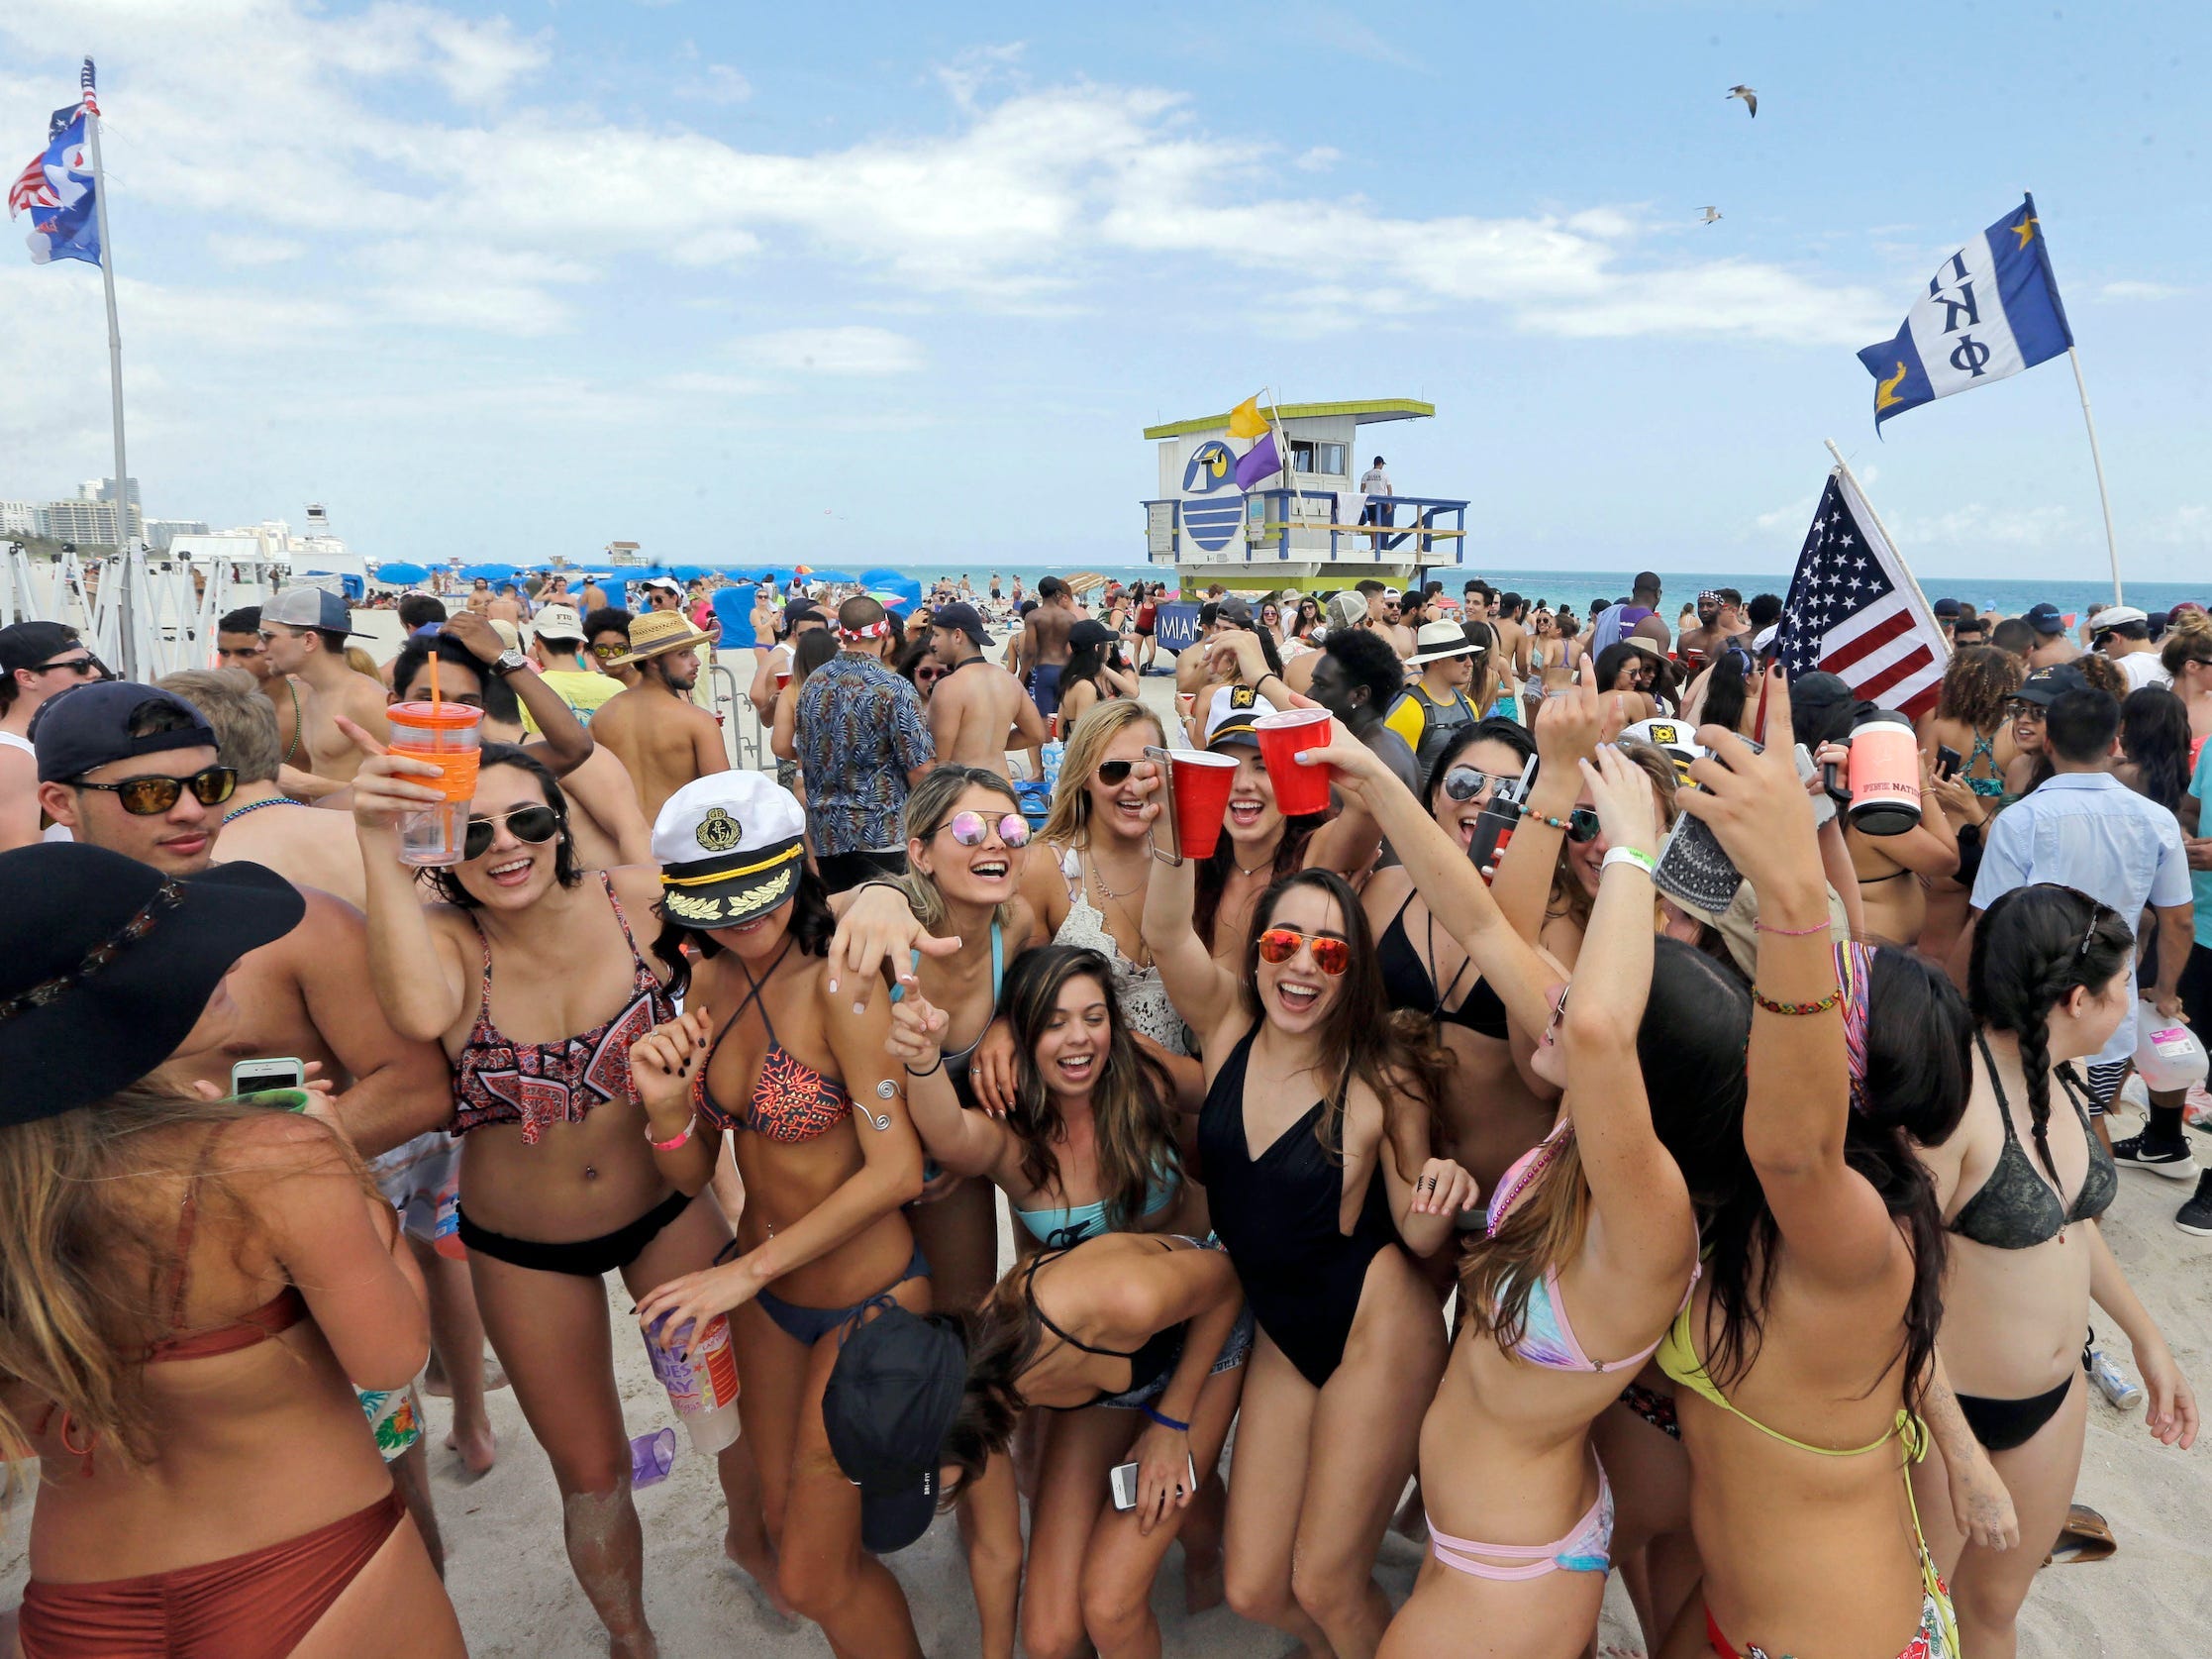 Local Florida officials are warning spring breakers to stay away from